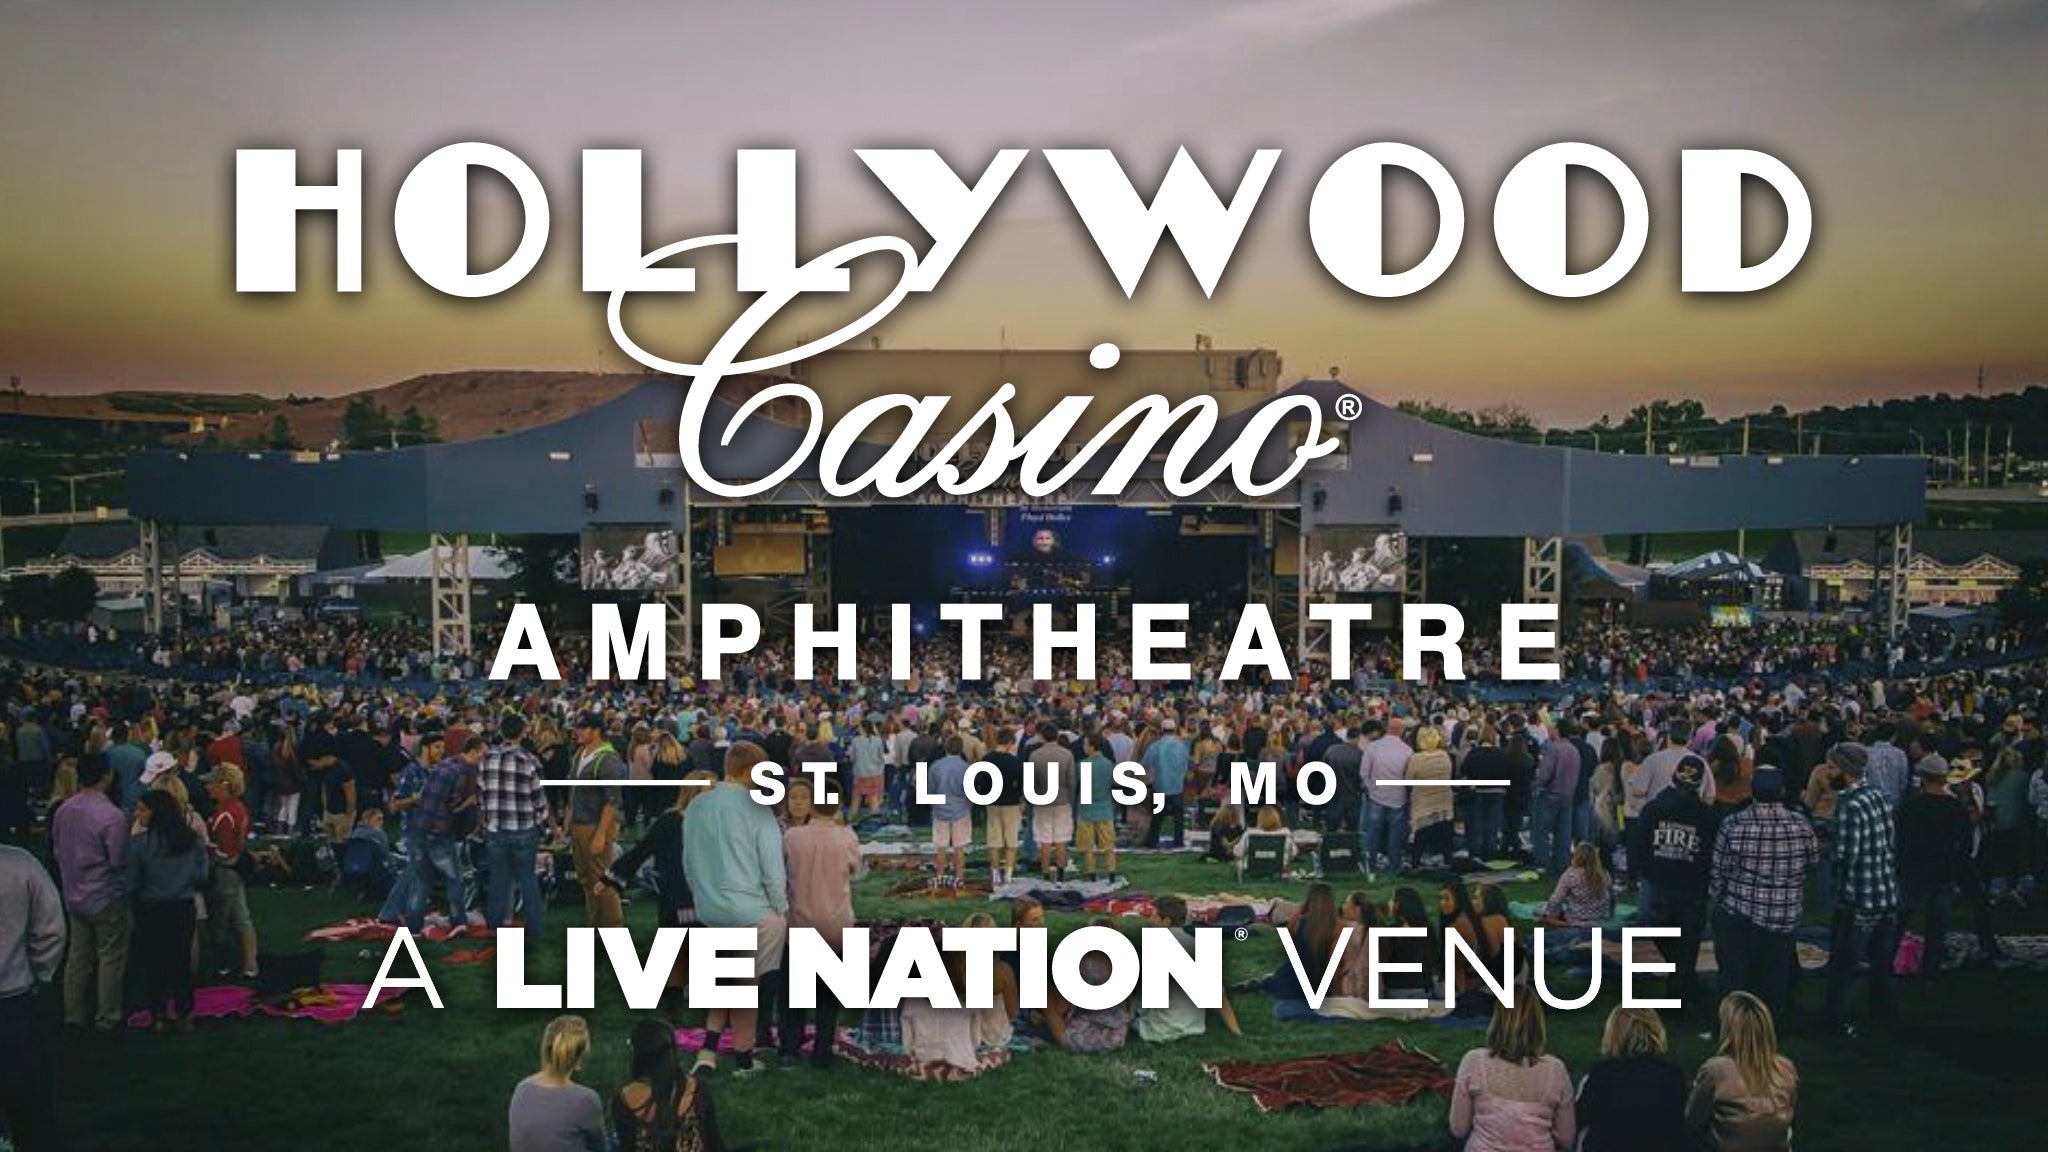 is hollywood casino open in st louis